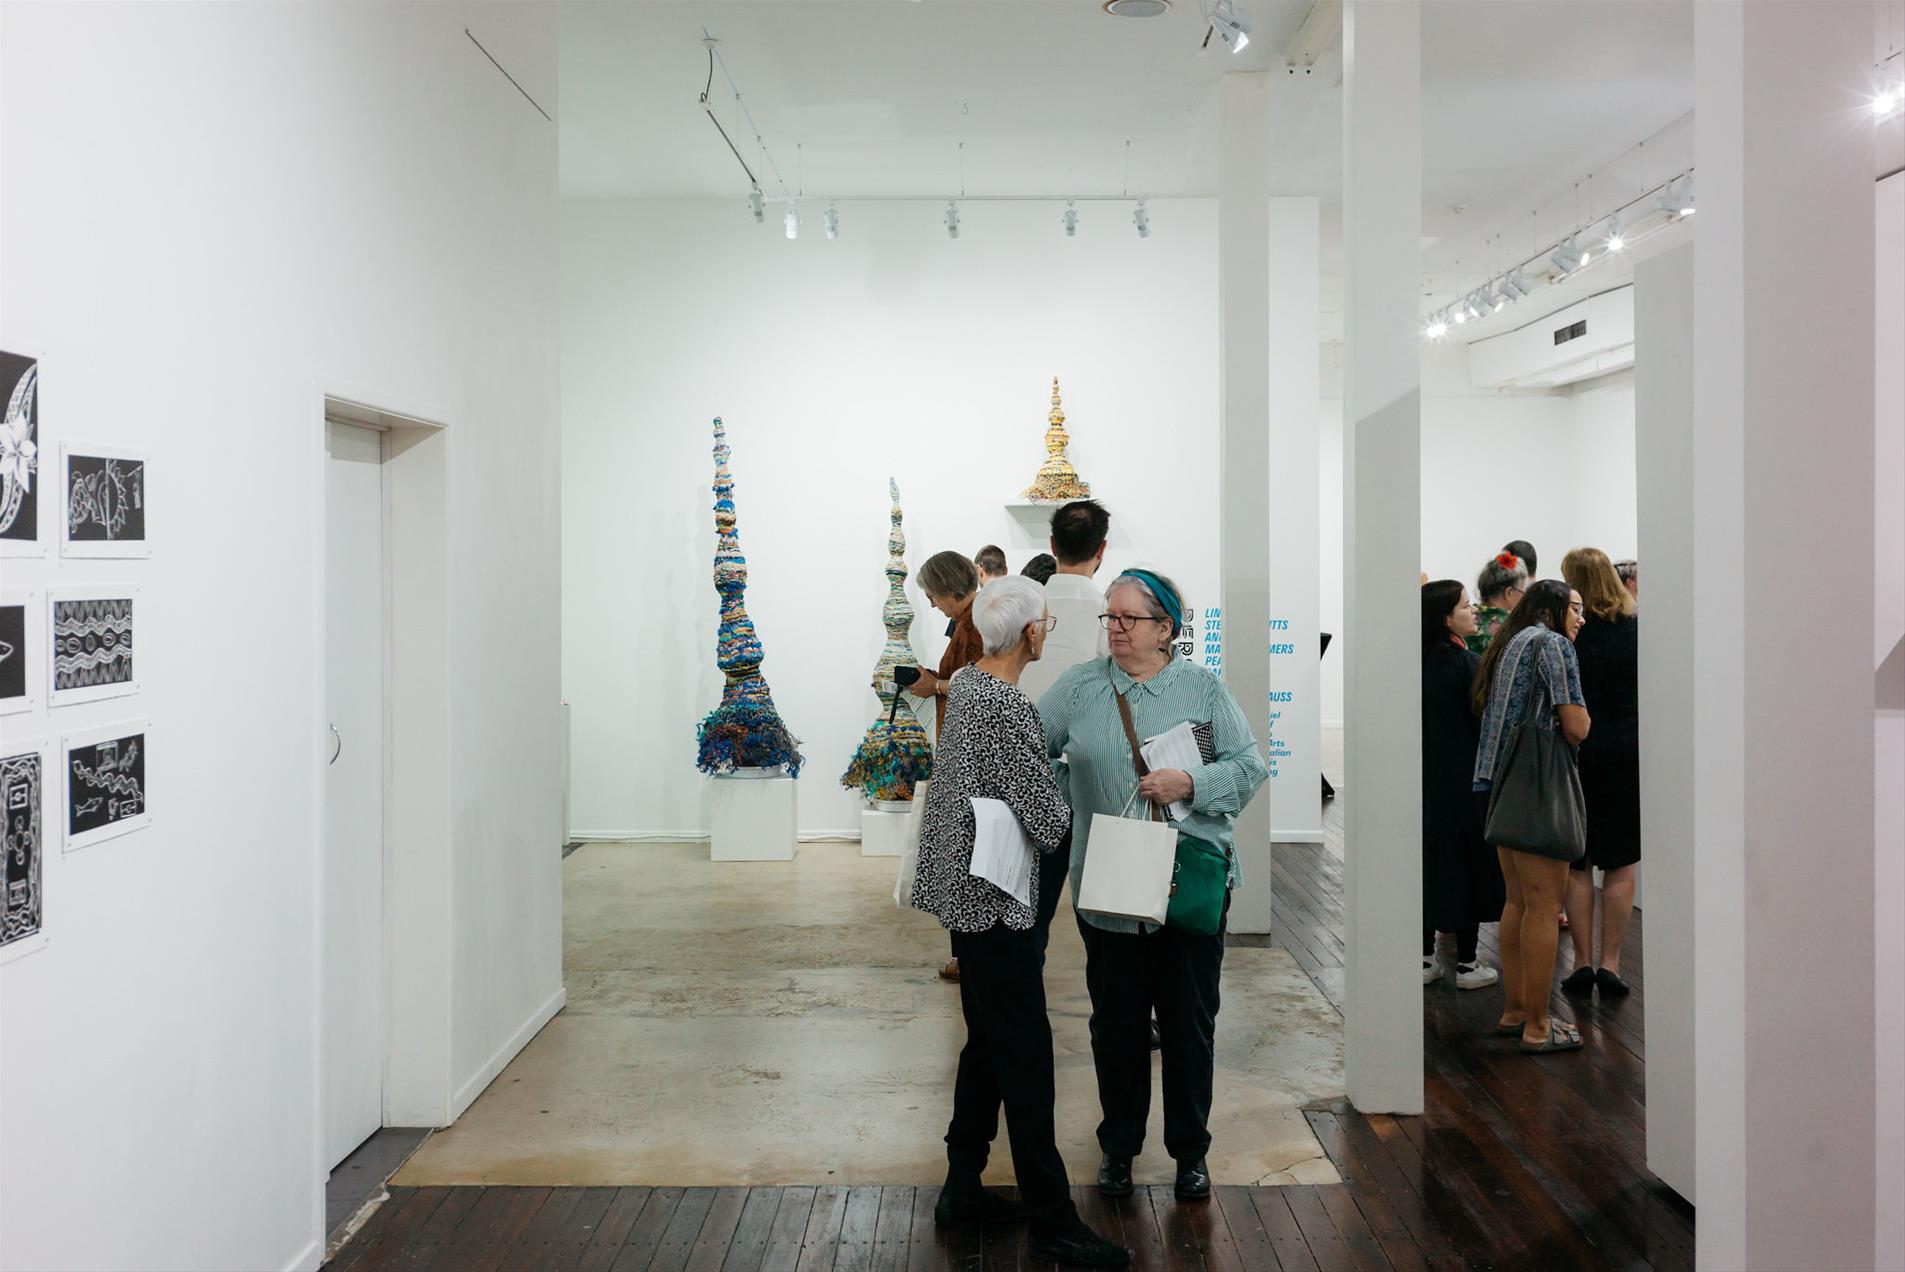 A crowd of people standing in a gallery.